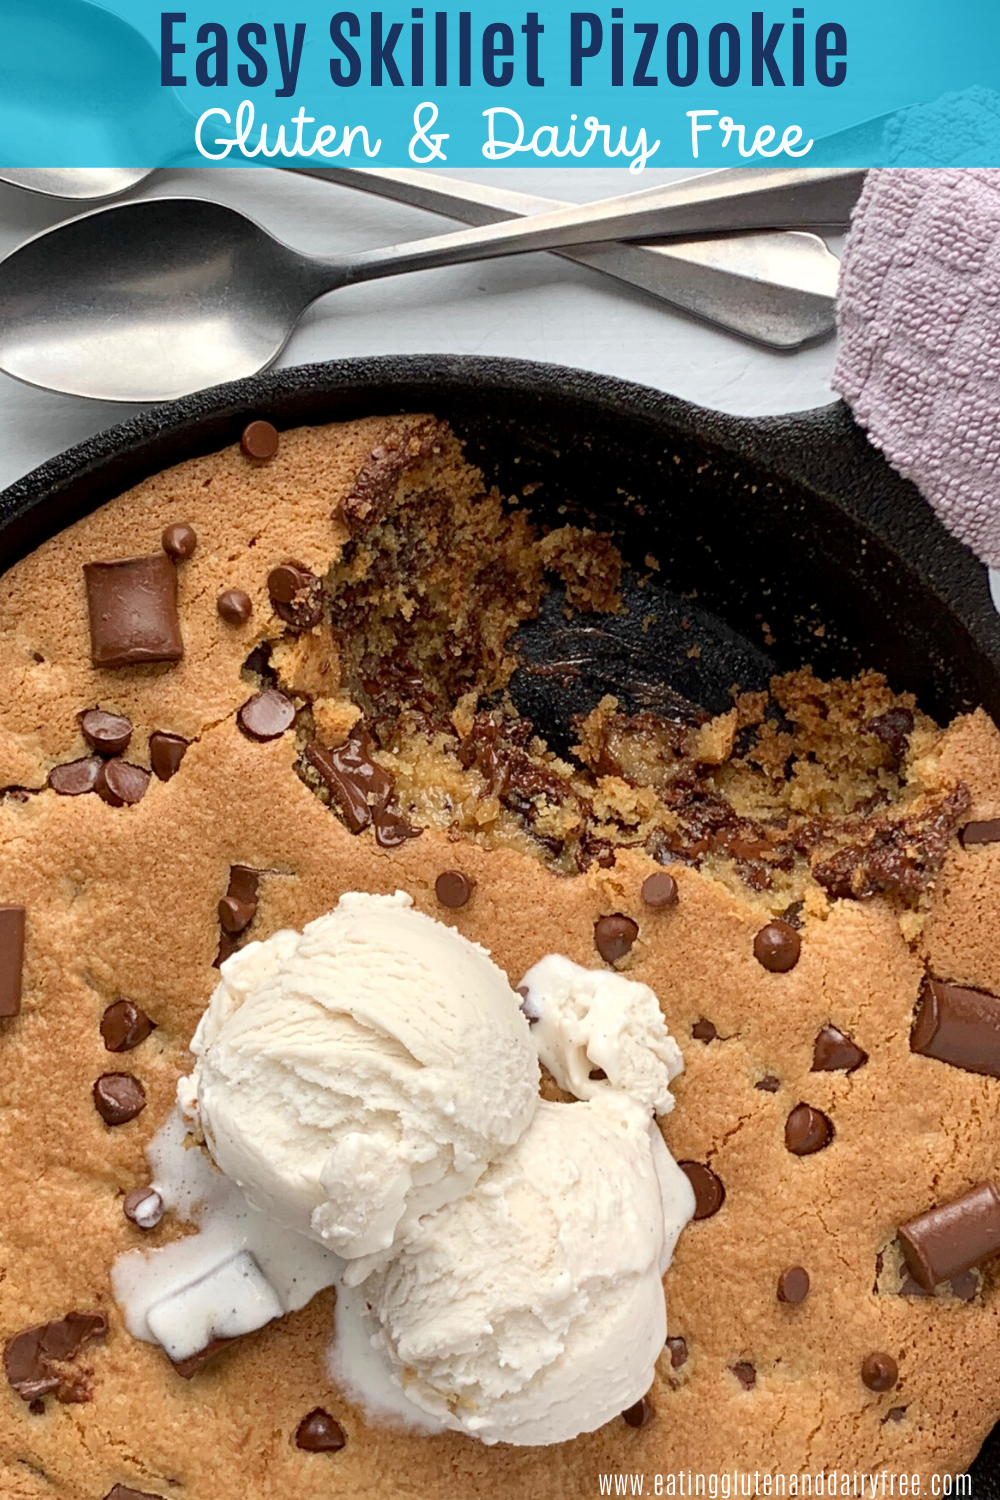 Pizookie with ice cream in a skillet.